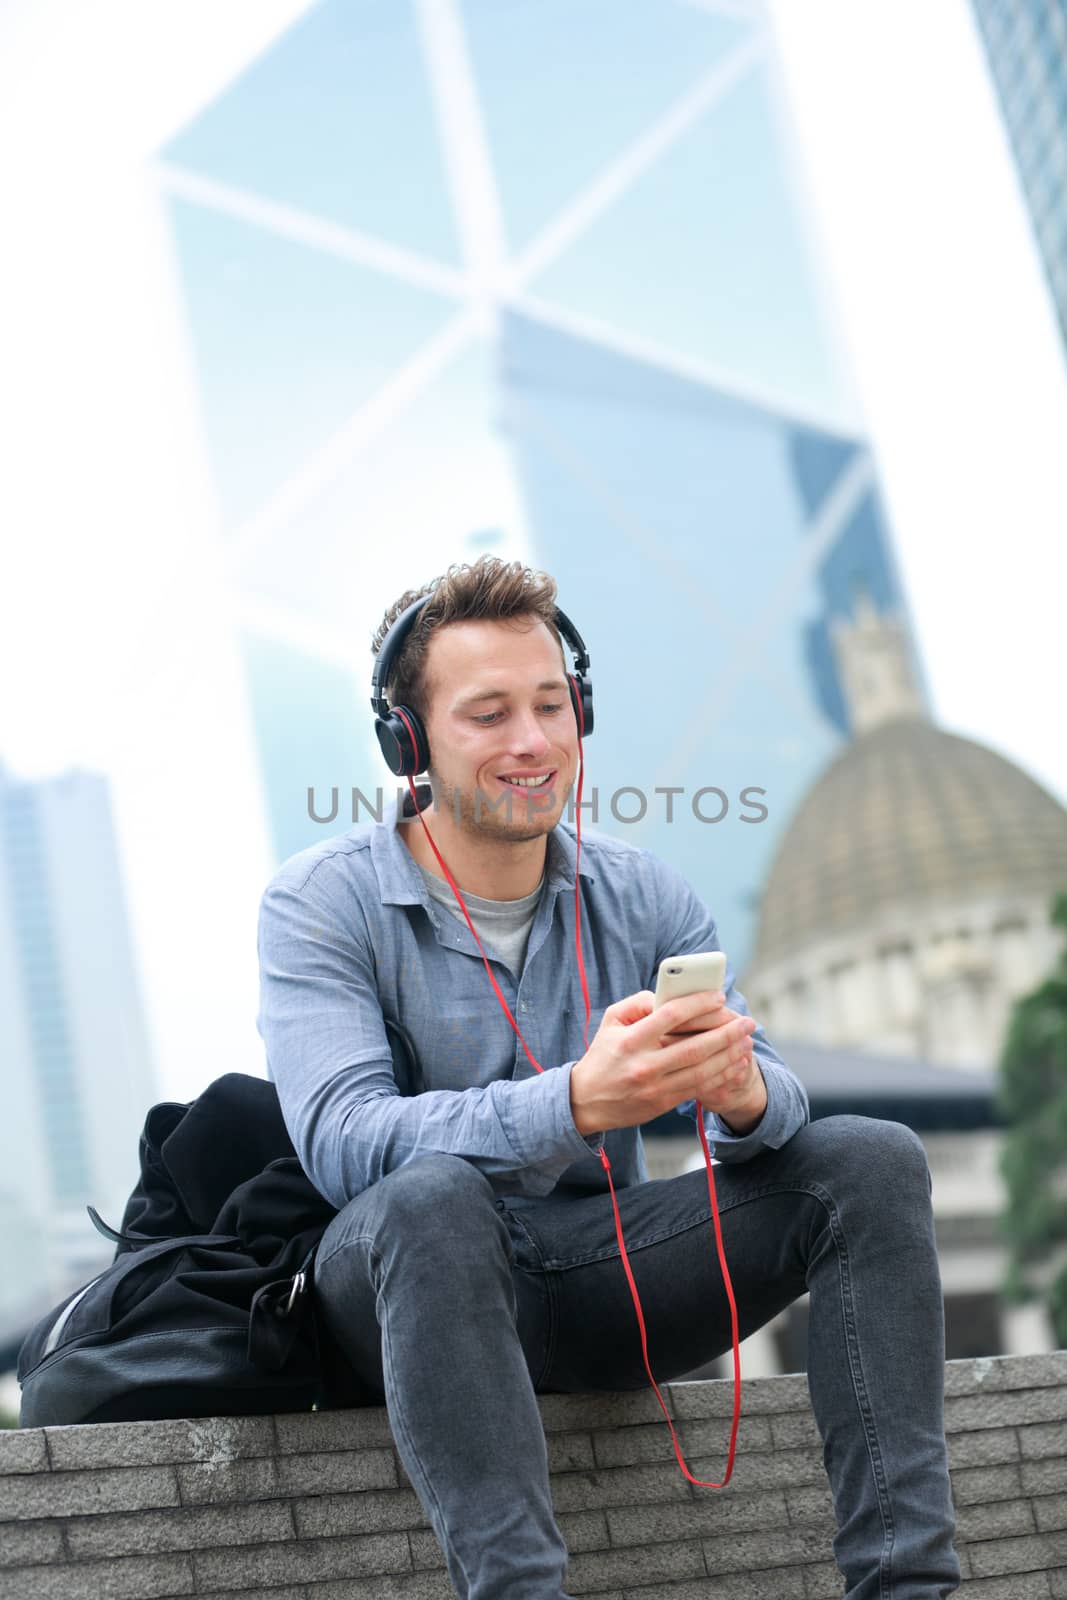 Urban man on smart phone wearing headphones listening to music or having video chat conversation sitting outside using app on 4g smartphones. Casual young urban professional male in Hong Kong Central.